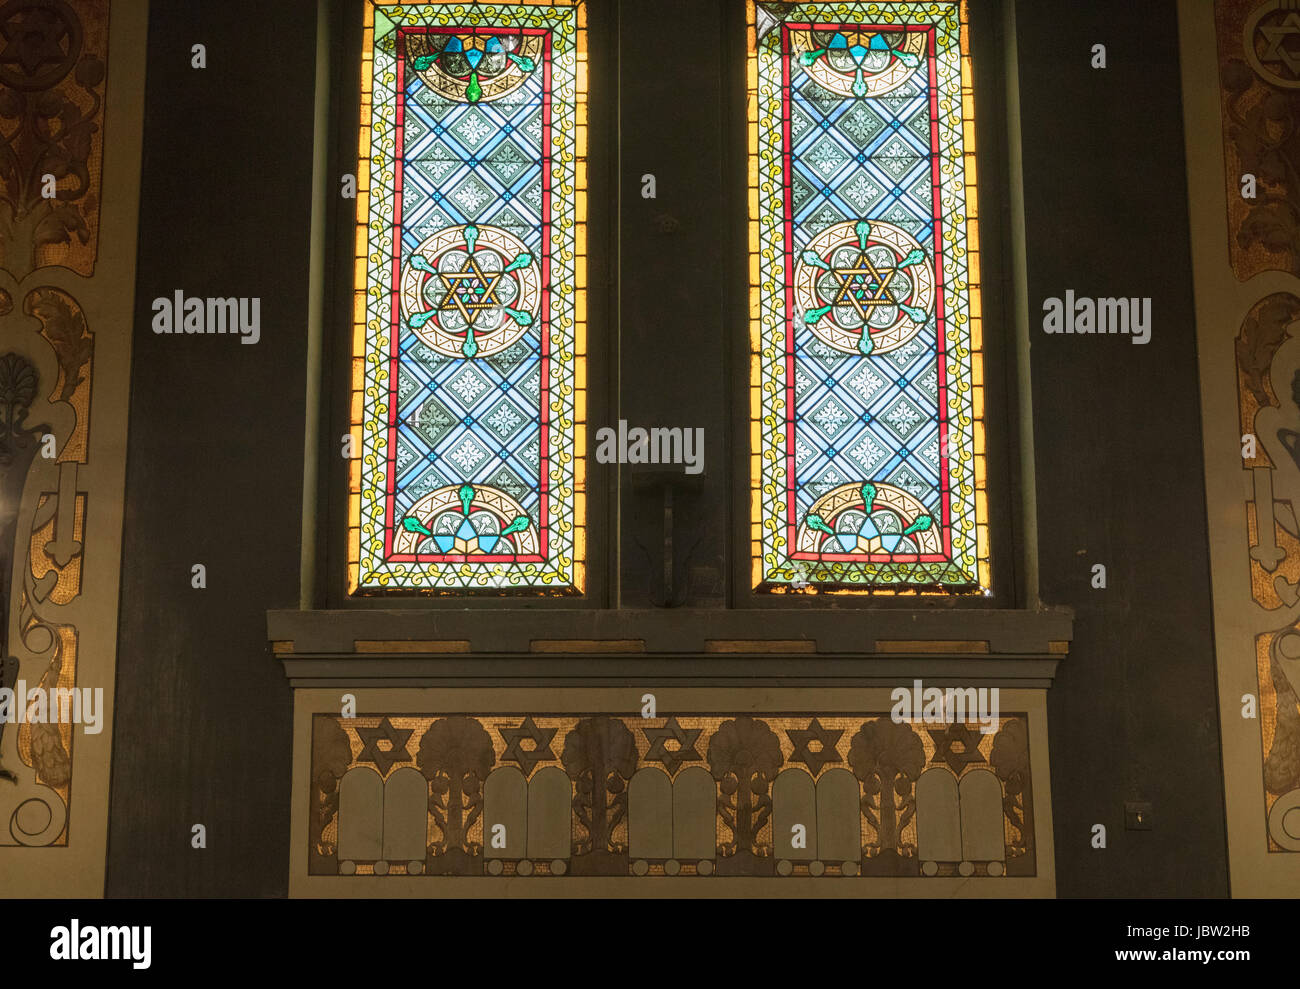 stained glass windows, The Gate of Heaven synagogue, Adly Street, Cairo, Egypt Stock Photo